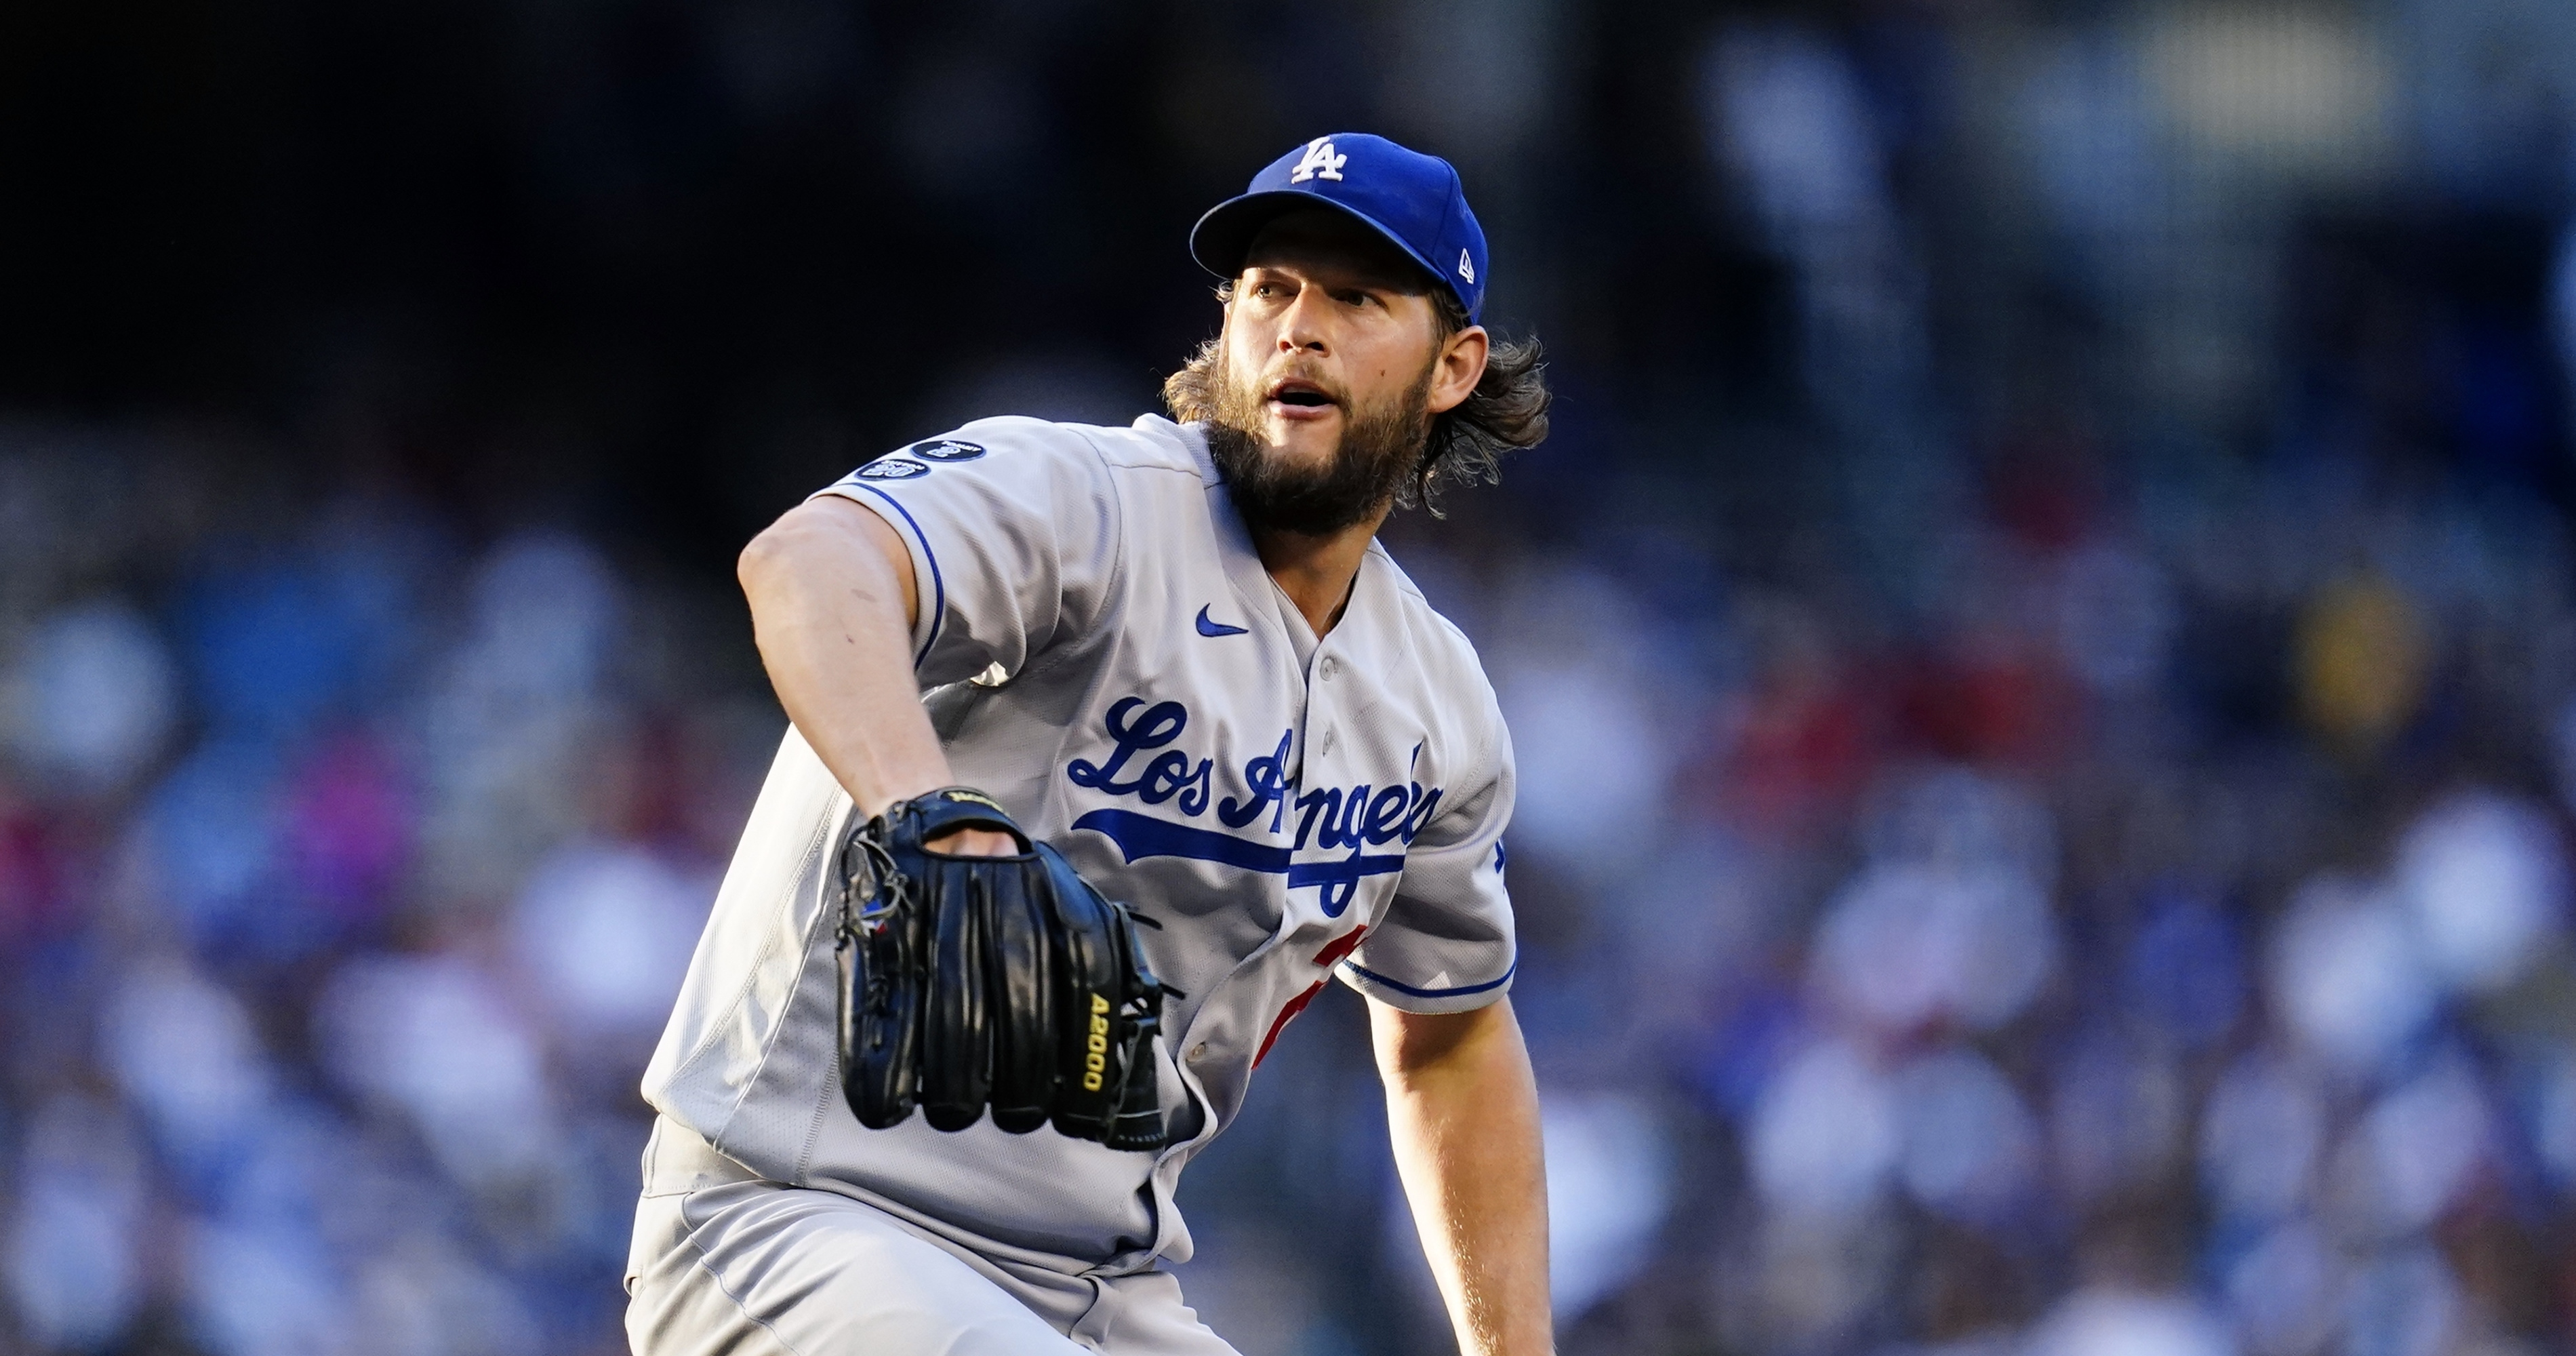 Clayton Kershaw overcomes shoulder injury to will himself into another  Dodgers postseason – KGET 17